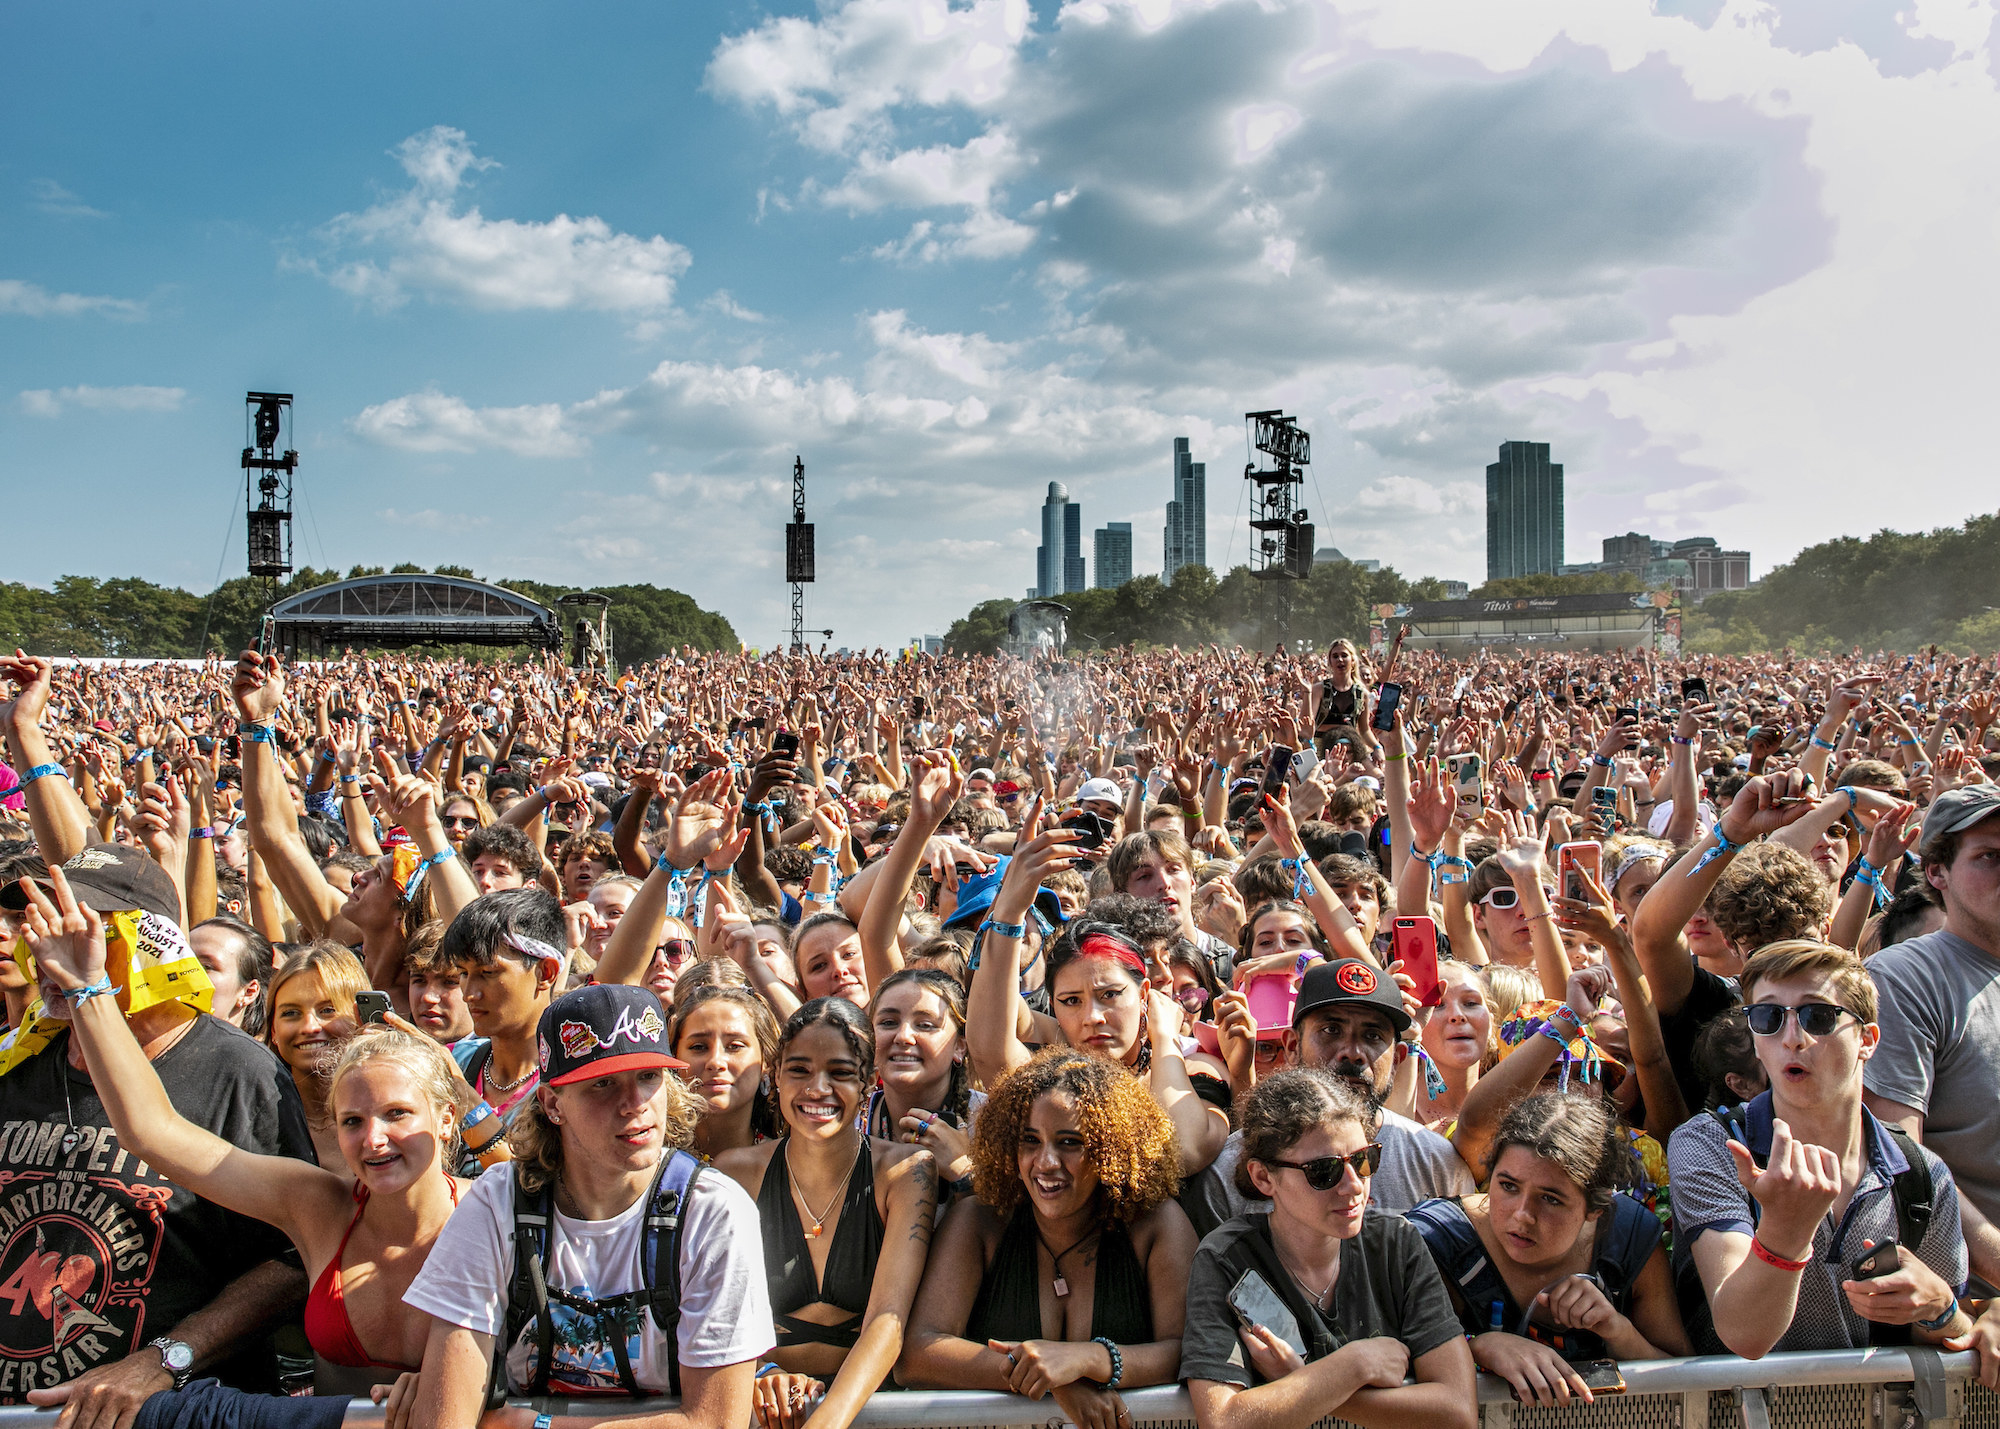 Thousands of young people pack into a festival venue for Lollapalooza in Chicago.